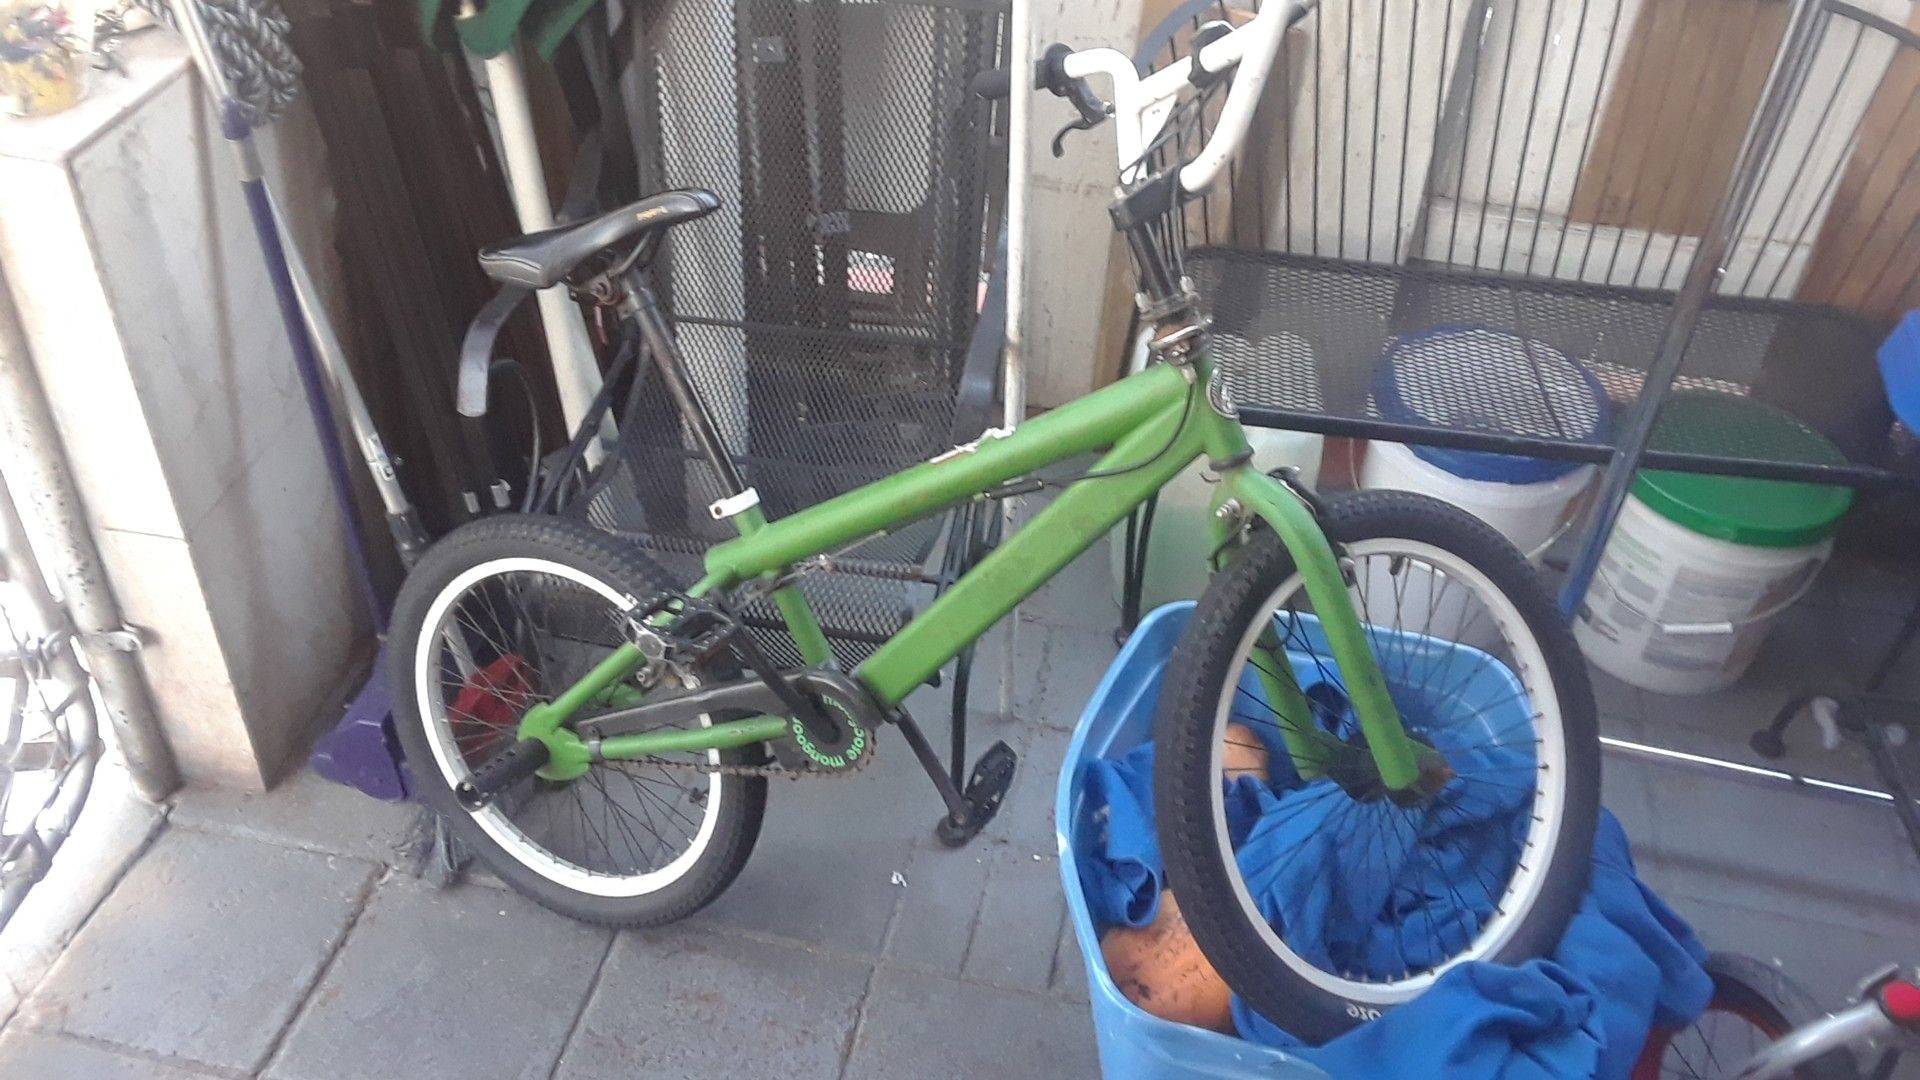 Mongoose bmx bike with rear pegs